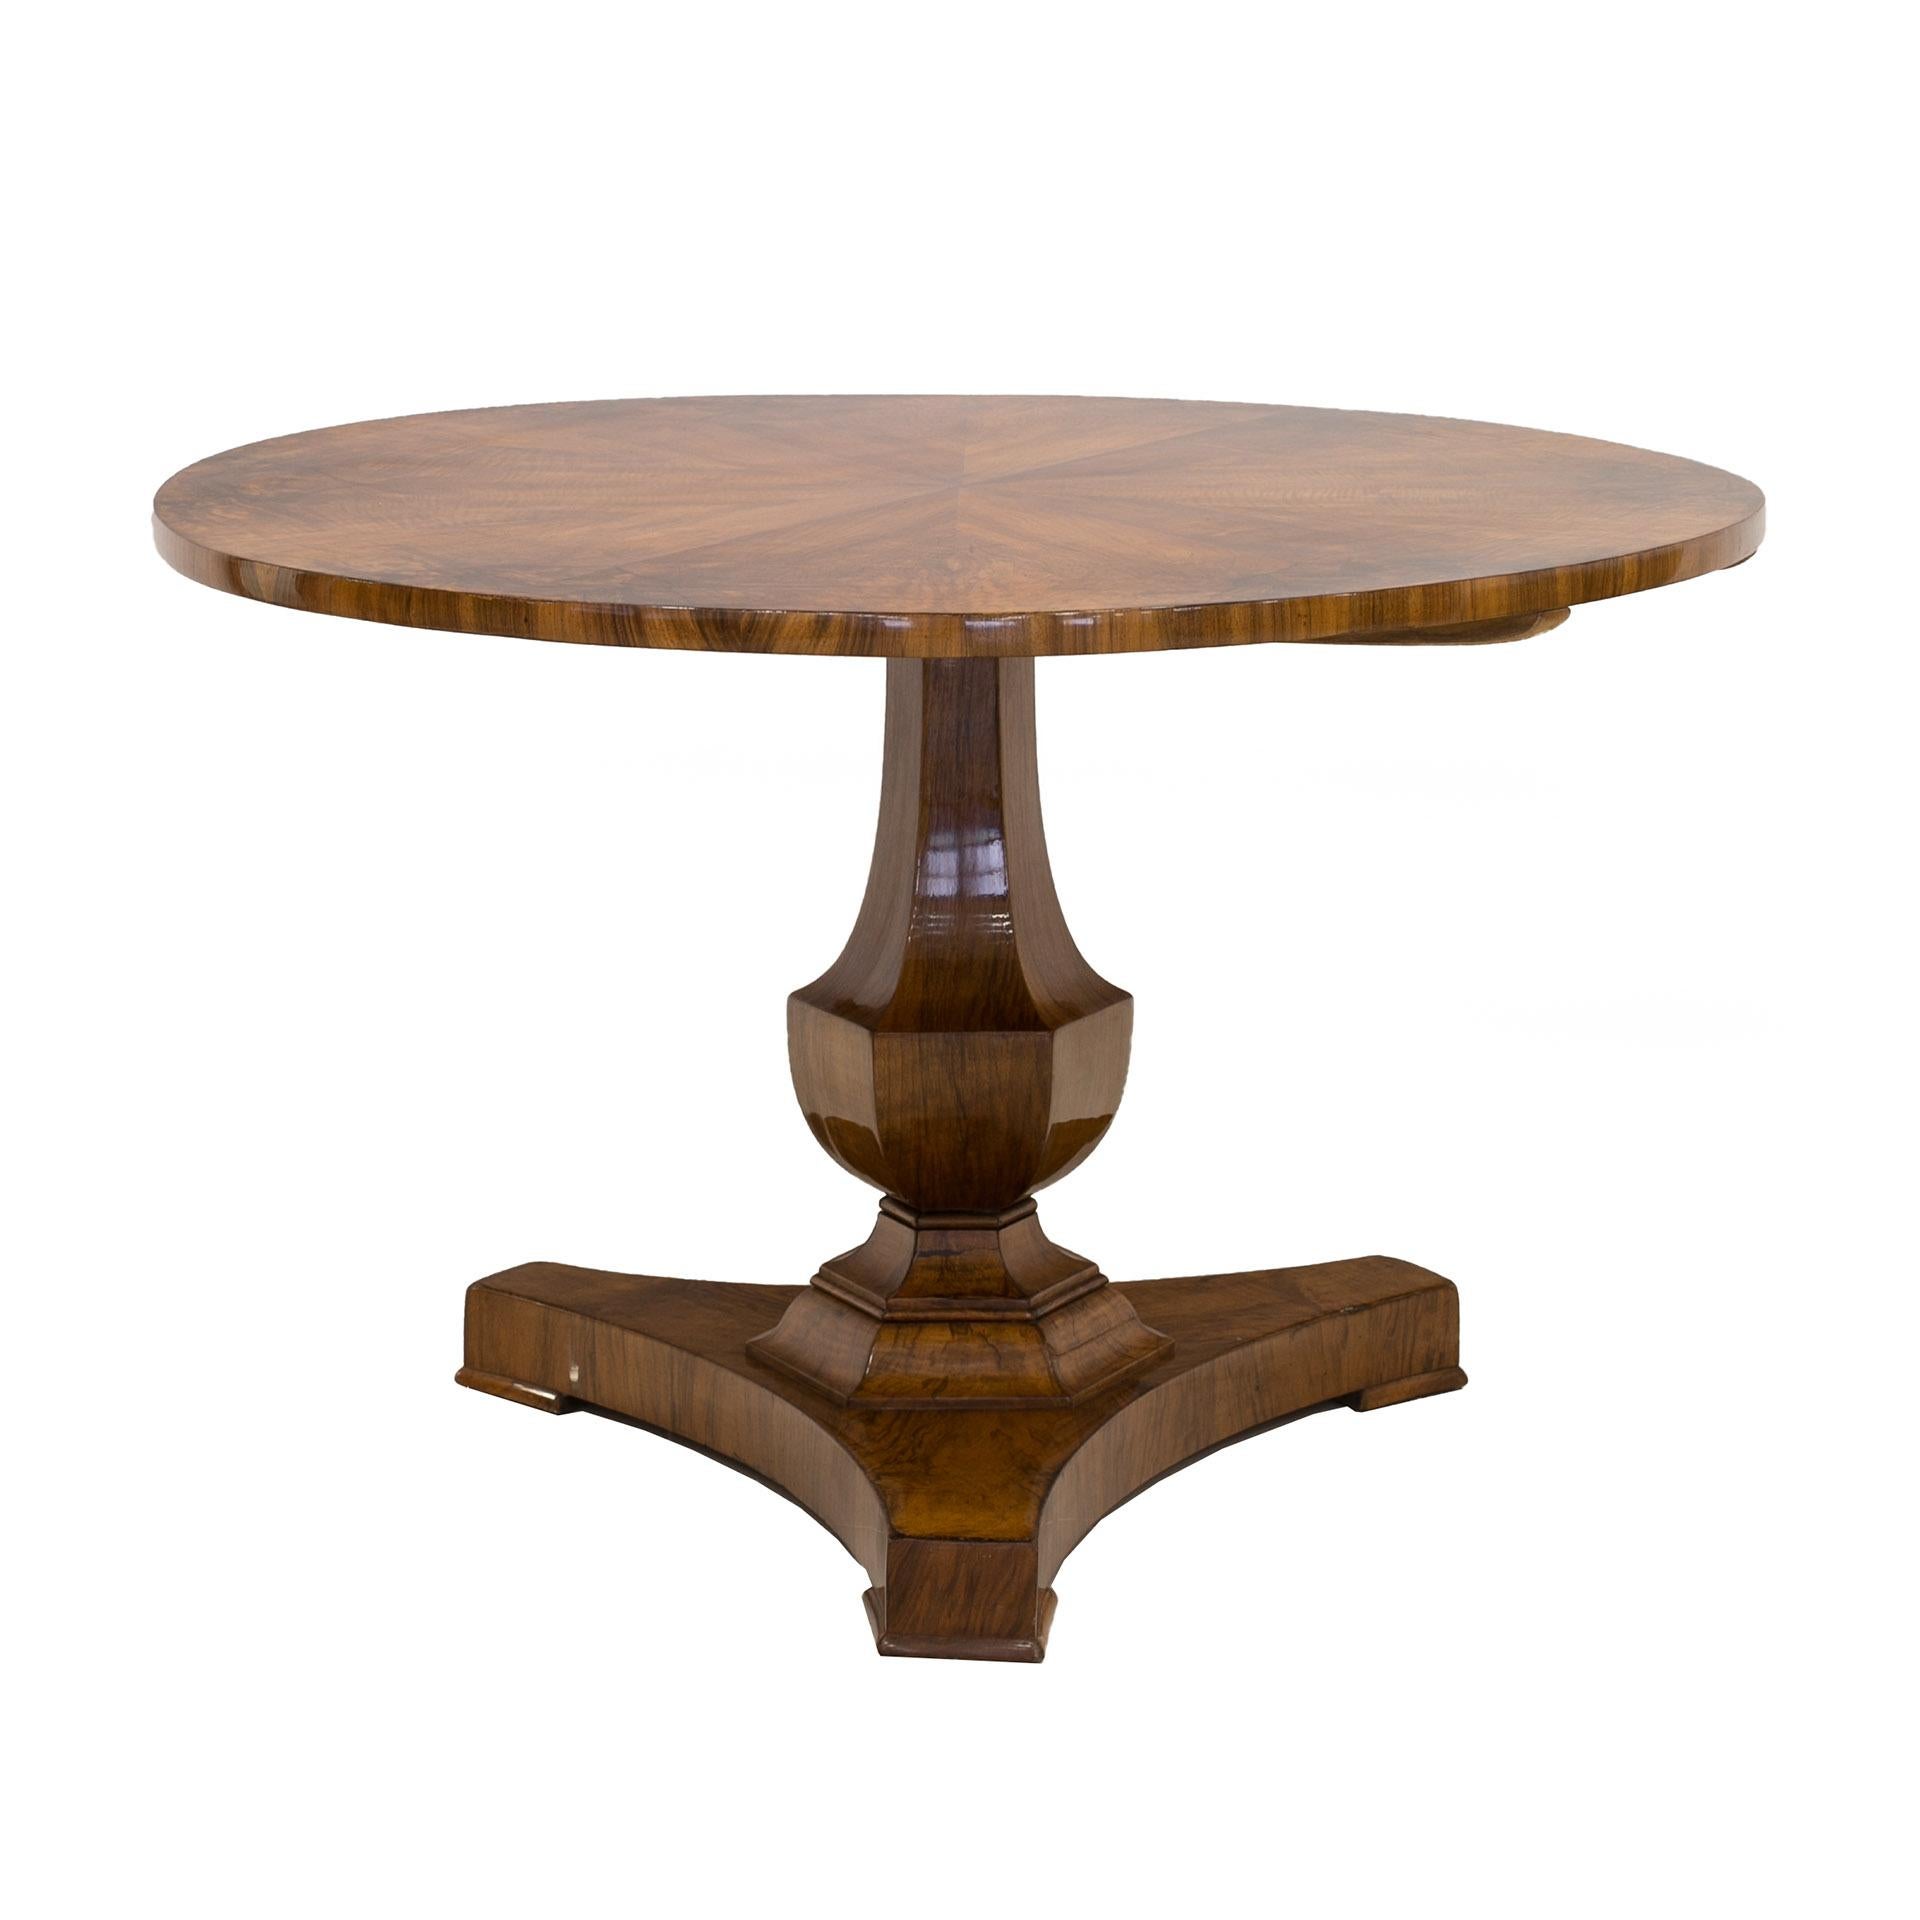 Varnished Biedermeier Round Table in Walnut Wood, Germany, Early 19th Century